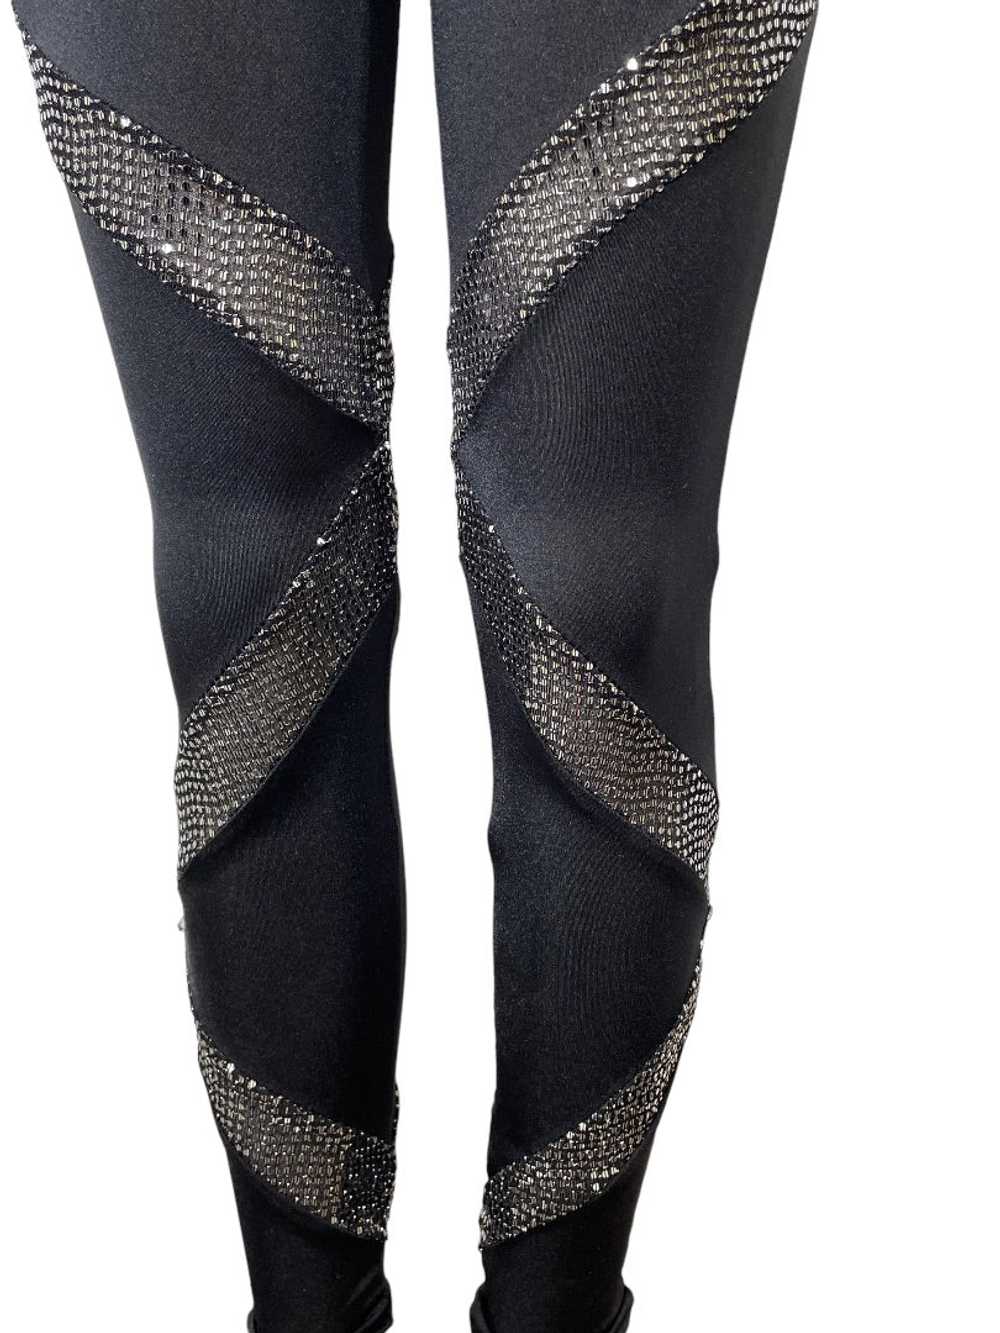 Dance costume - LOSE MY BREATH-Leggings Only - image 2